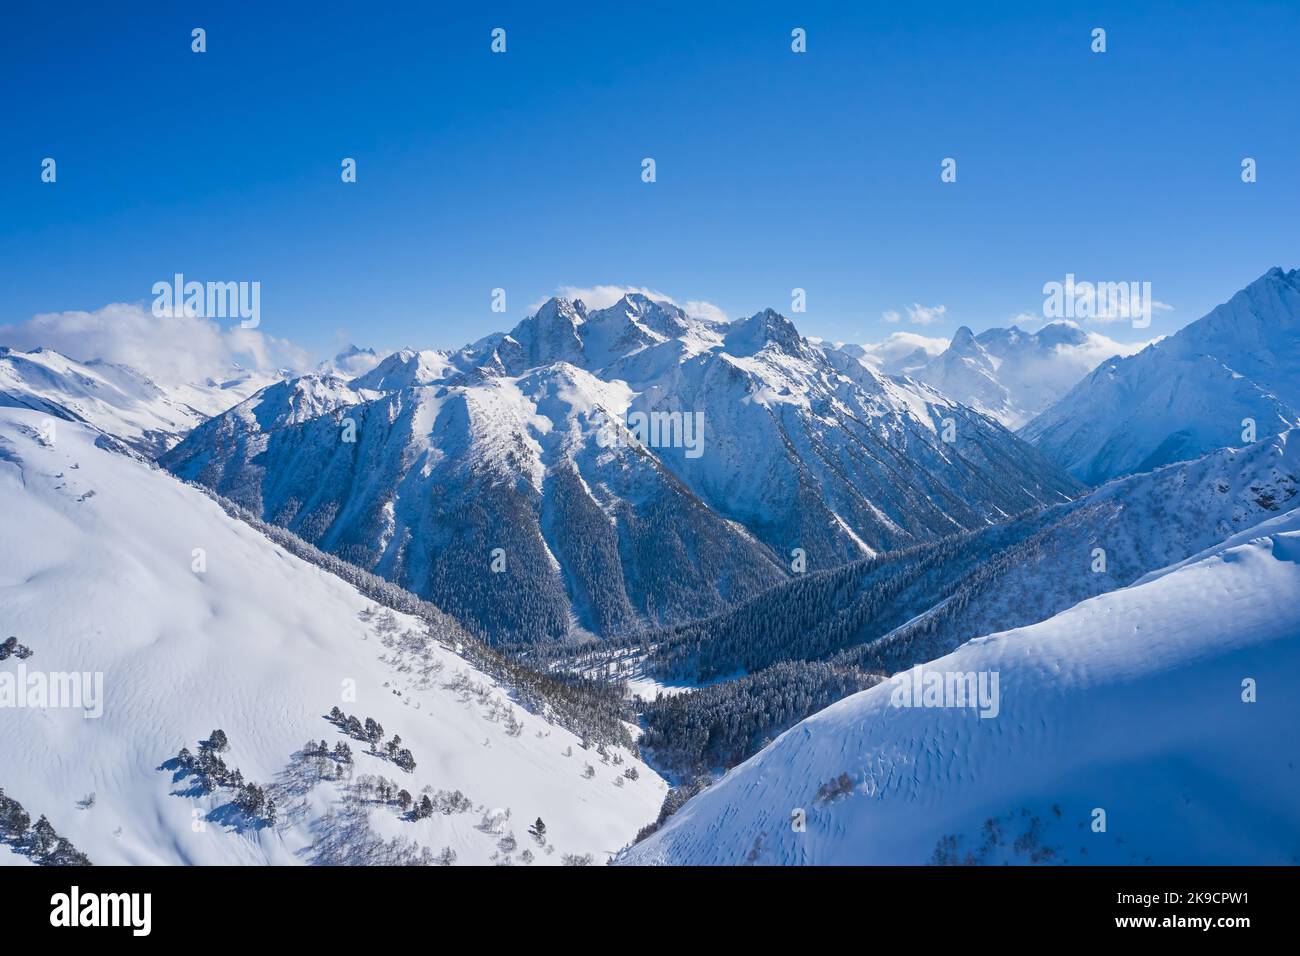 View of the snow capped mountain and snow-covered gorge. Stock Photo